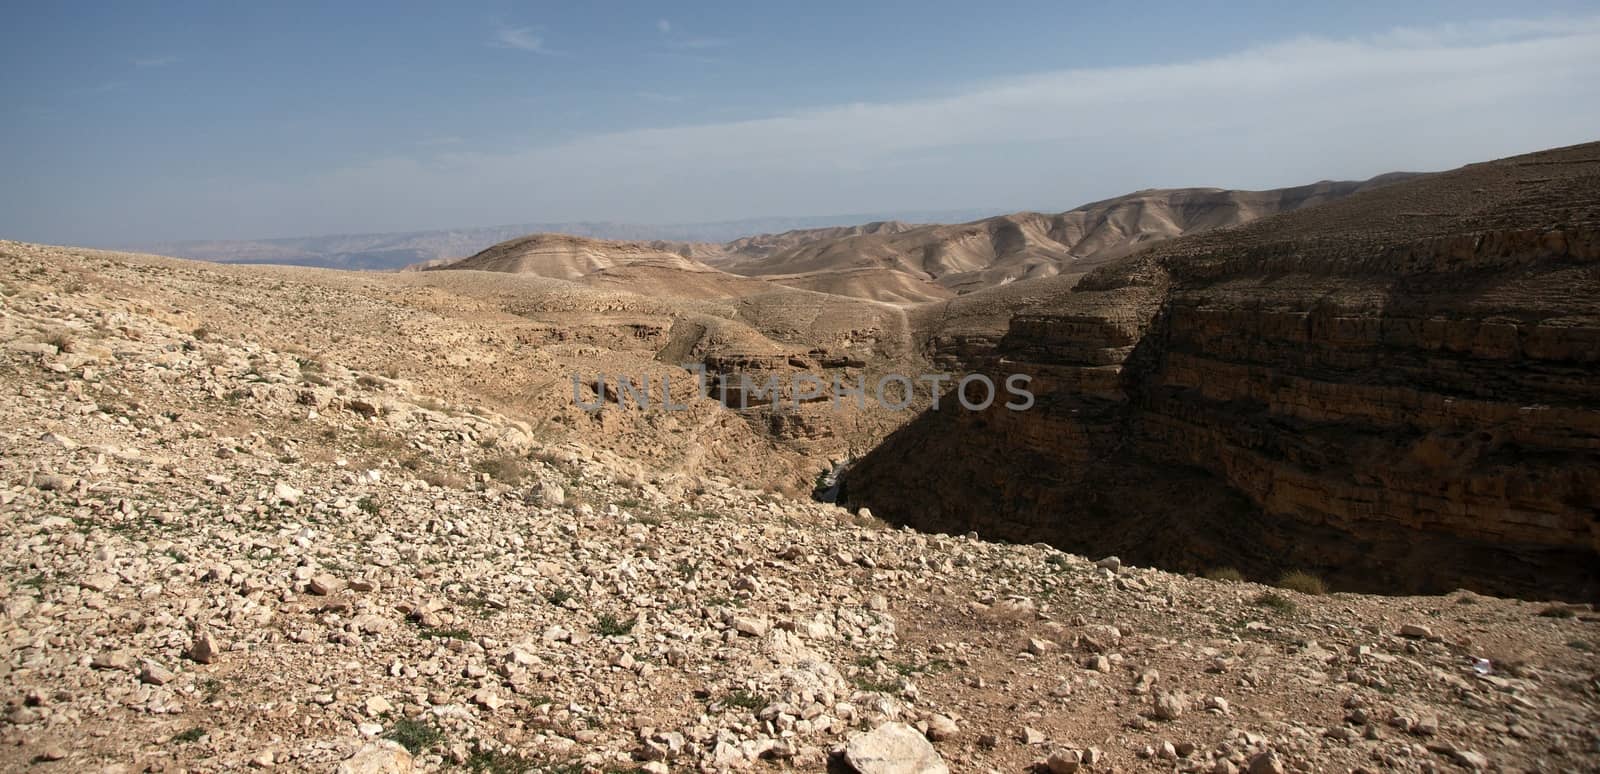 travel at spring in judean desert for hermits caves and monk monastery